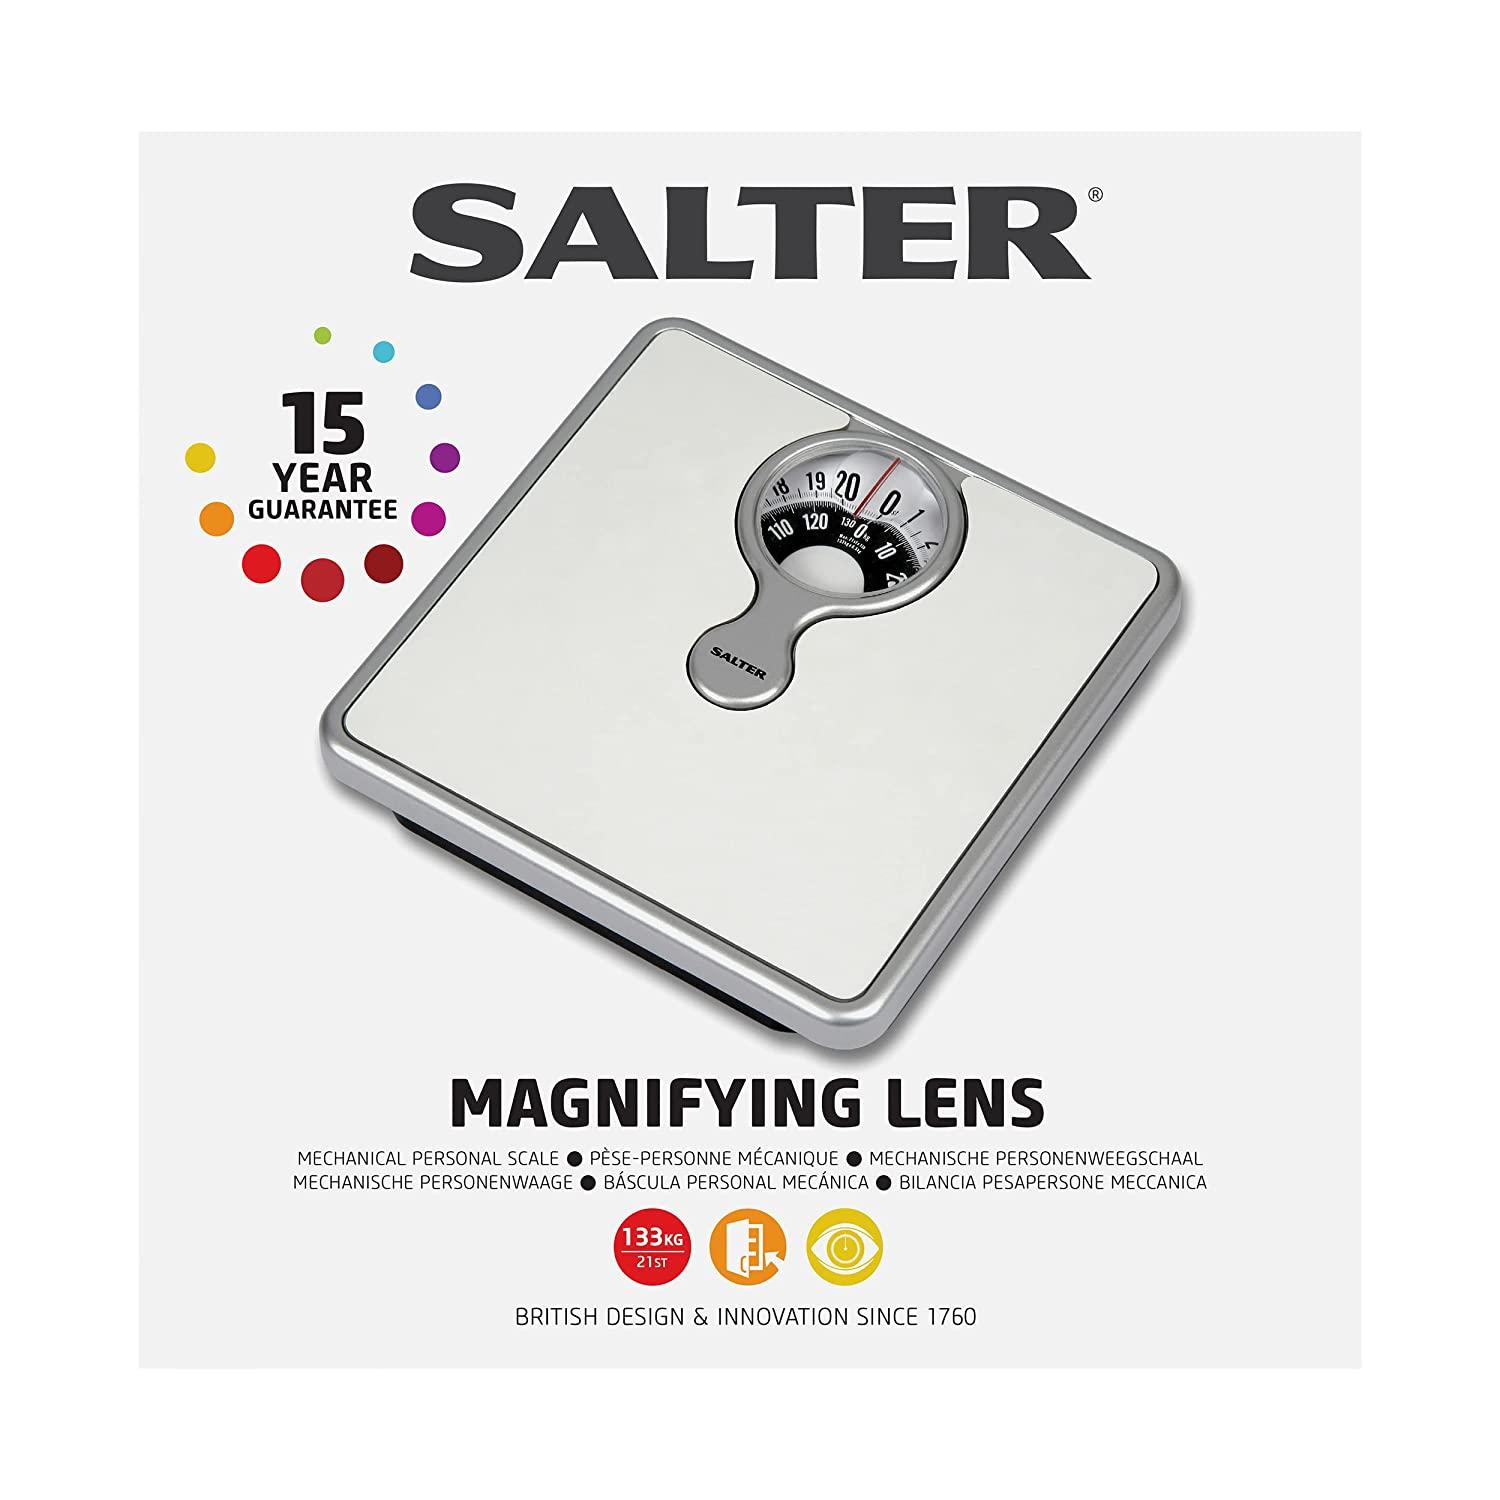 Salter 484 WHDR Magnified Mechanical Scales, 133 kg Maximum Capacity, Compact Design, Magnifying Lens, Bathroom, Easy to Read Dial, Cushioned, No